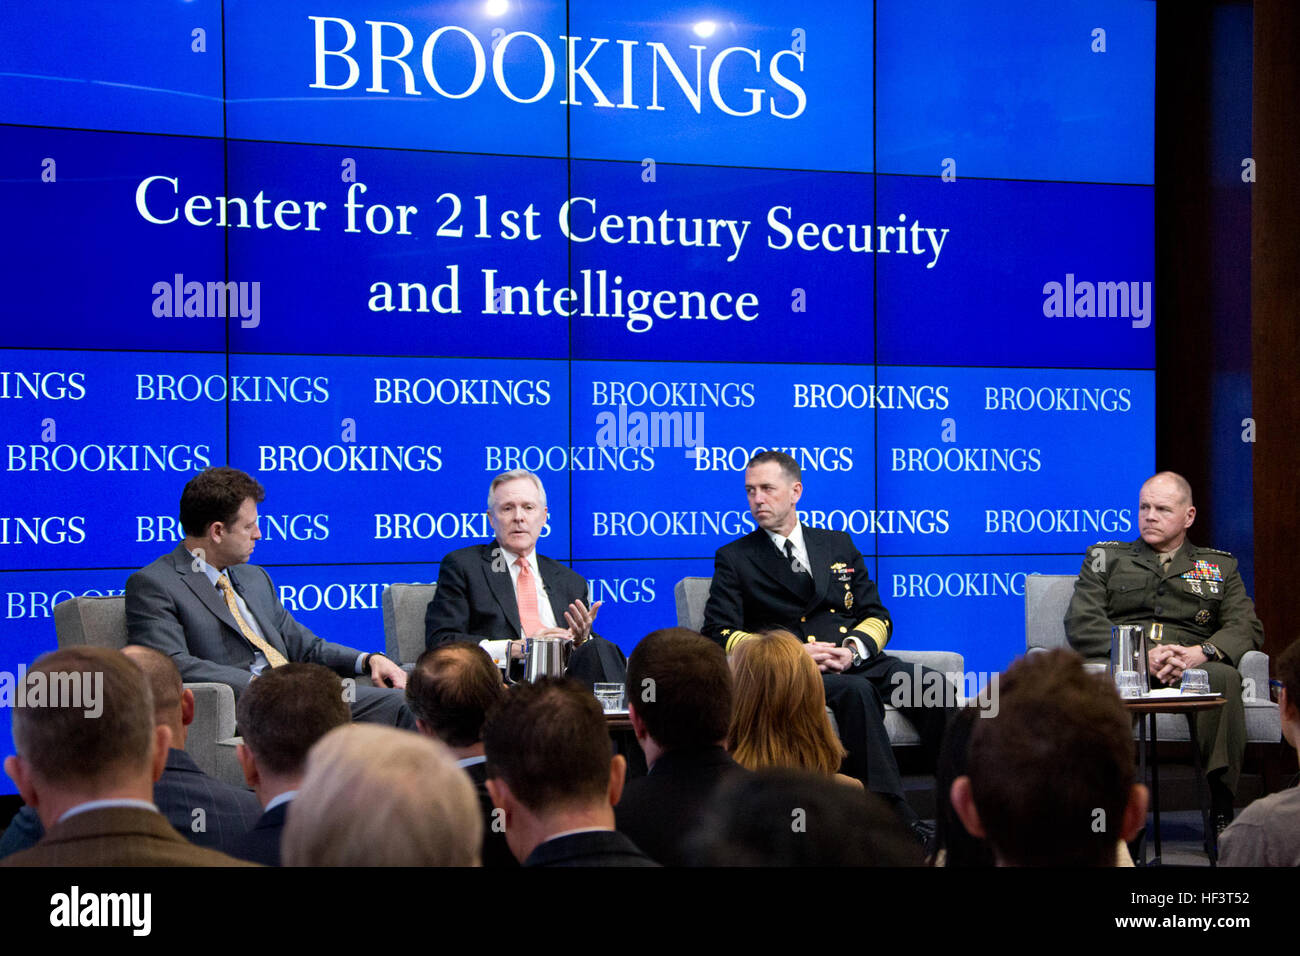 From second left, Secretary of the Navy Ray Mabus, and Chief of Naval Operations Adm. John M. Richardson and Commandant of the Marine Corps Gen. Robert B. Neller, attend the Center for 21st Century Security and Intelligence with Michael O'Hanlon, left, at the Brookings Institution, Washington, D.C., Feb. 26, 2016. Mabus, Richardson, and Neller discussed the future maritime concepts, strategies and technologies with O'Hanlon as the moderator. (U.S. Marine Corps photo by Staff Sgt. Gabriela Garcia/Released) CMC at Brookings 160226-M-SA716-030 Stock Photo